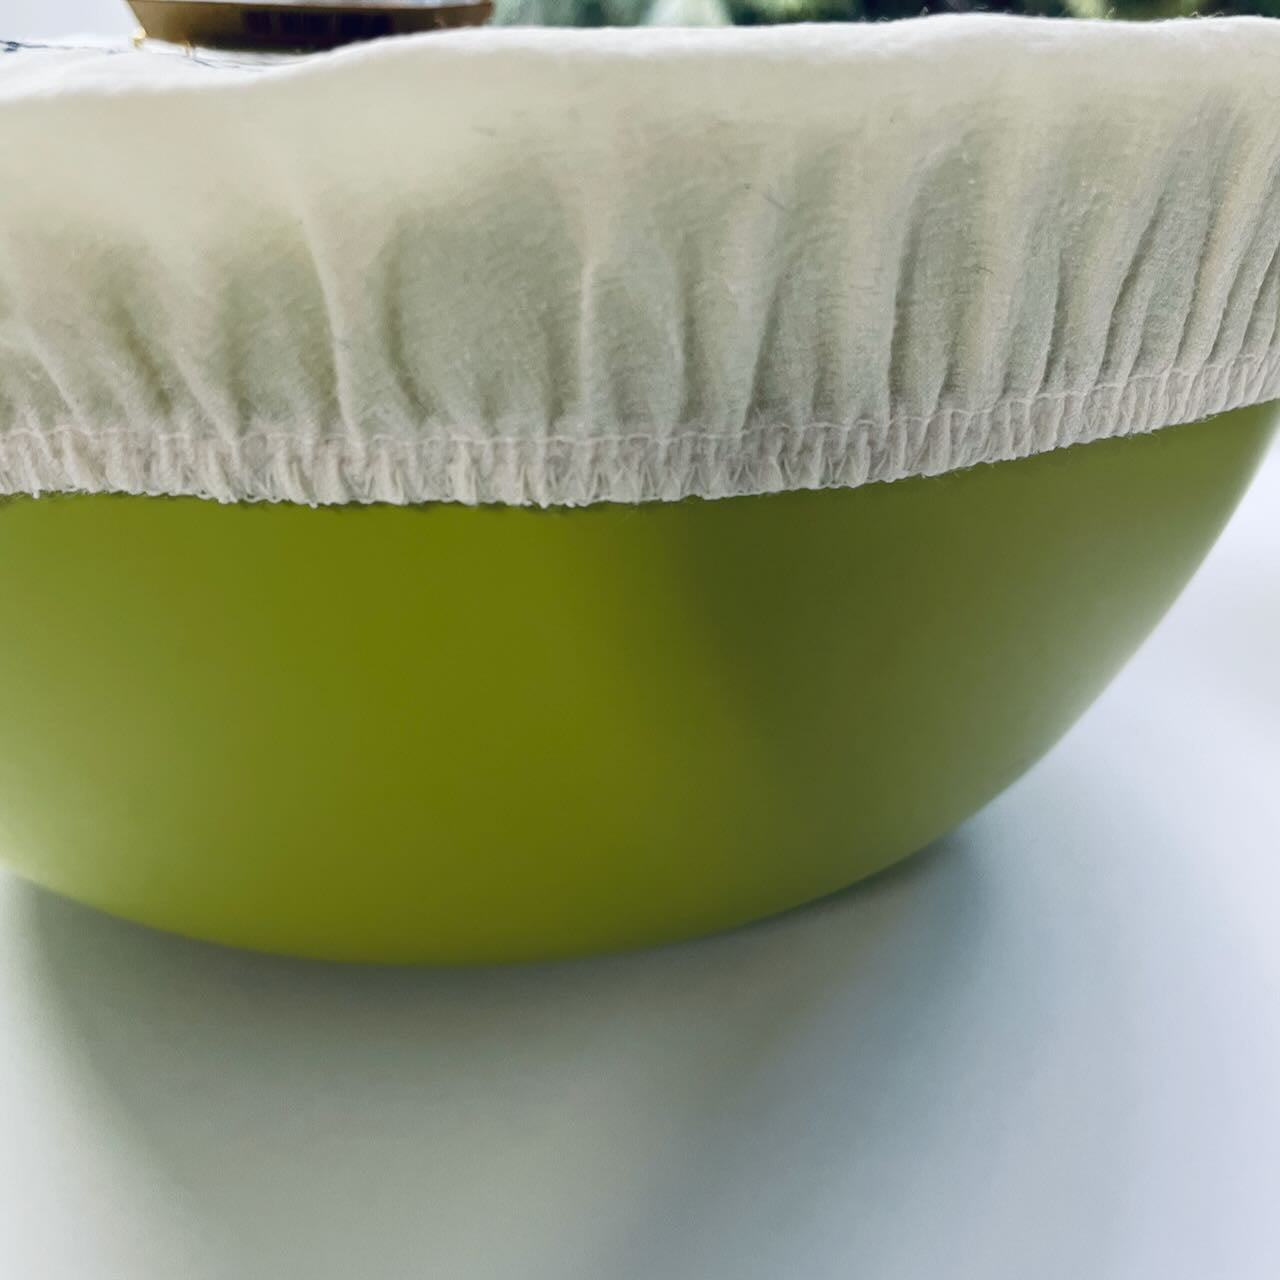 Waxed Reusable Fabric Bowl Cover: Pineapple - XL 12"